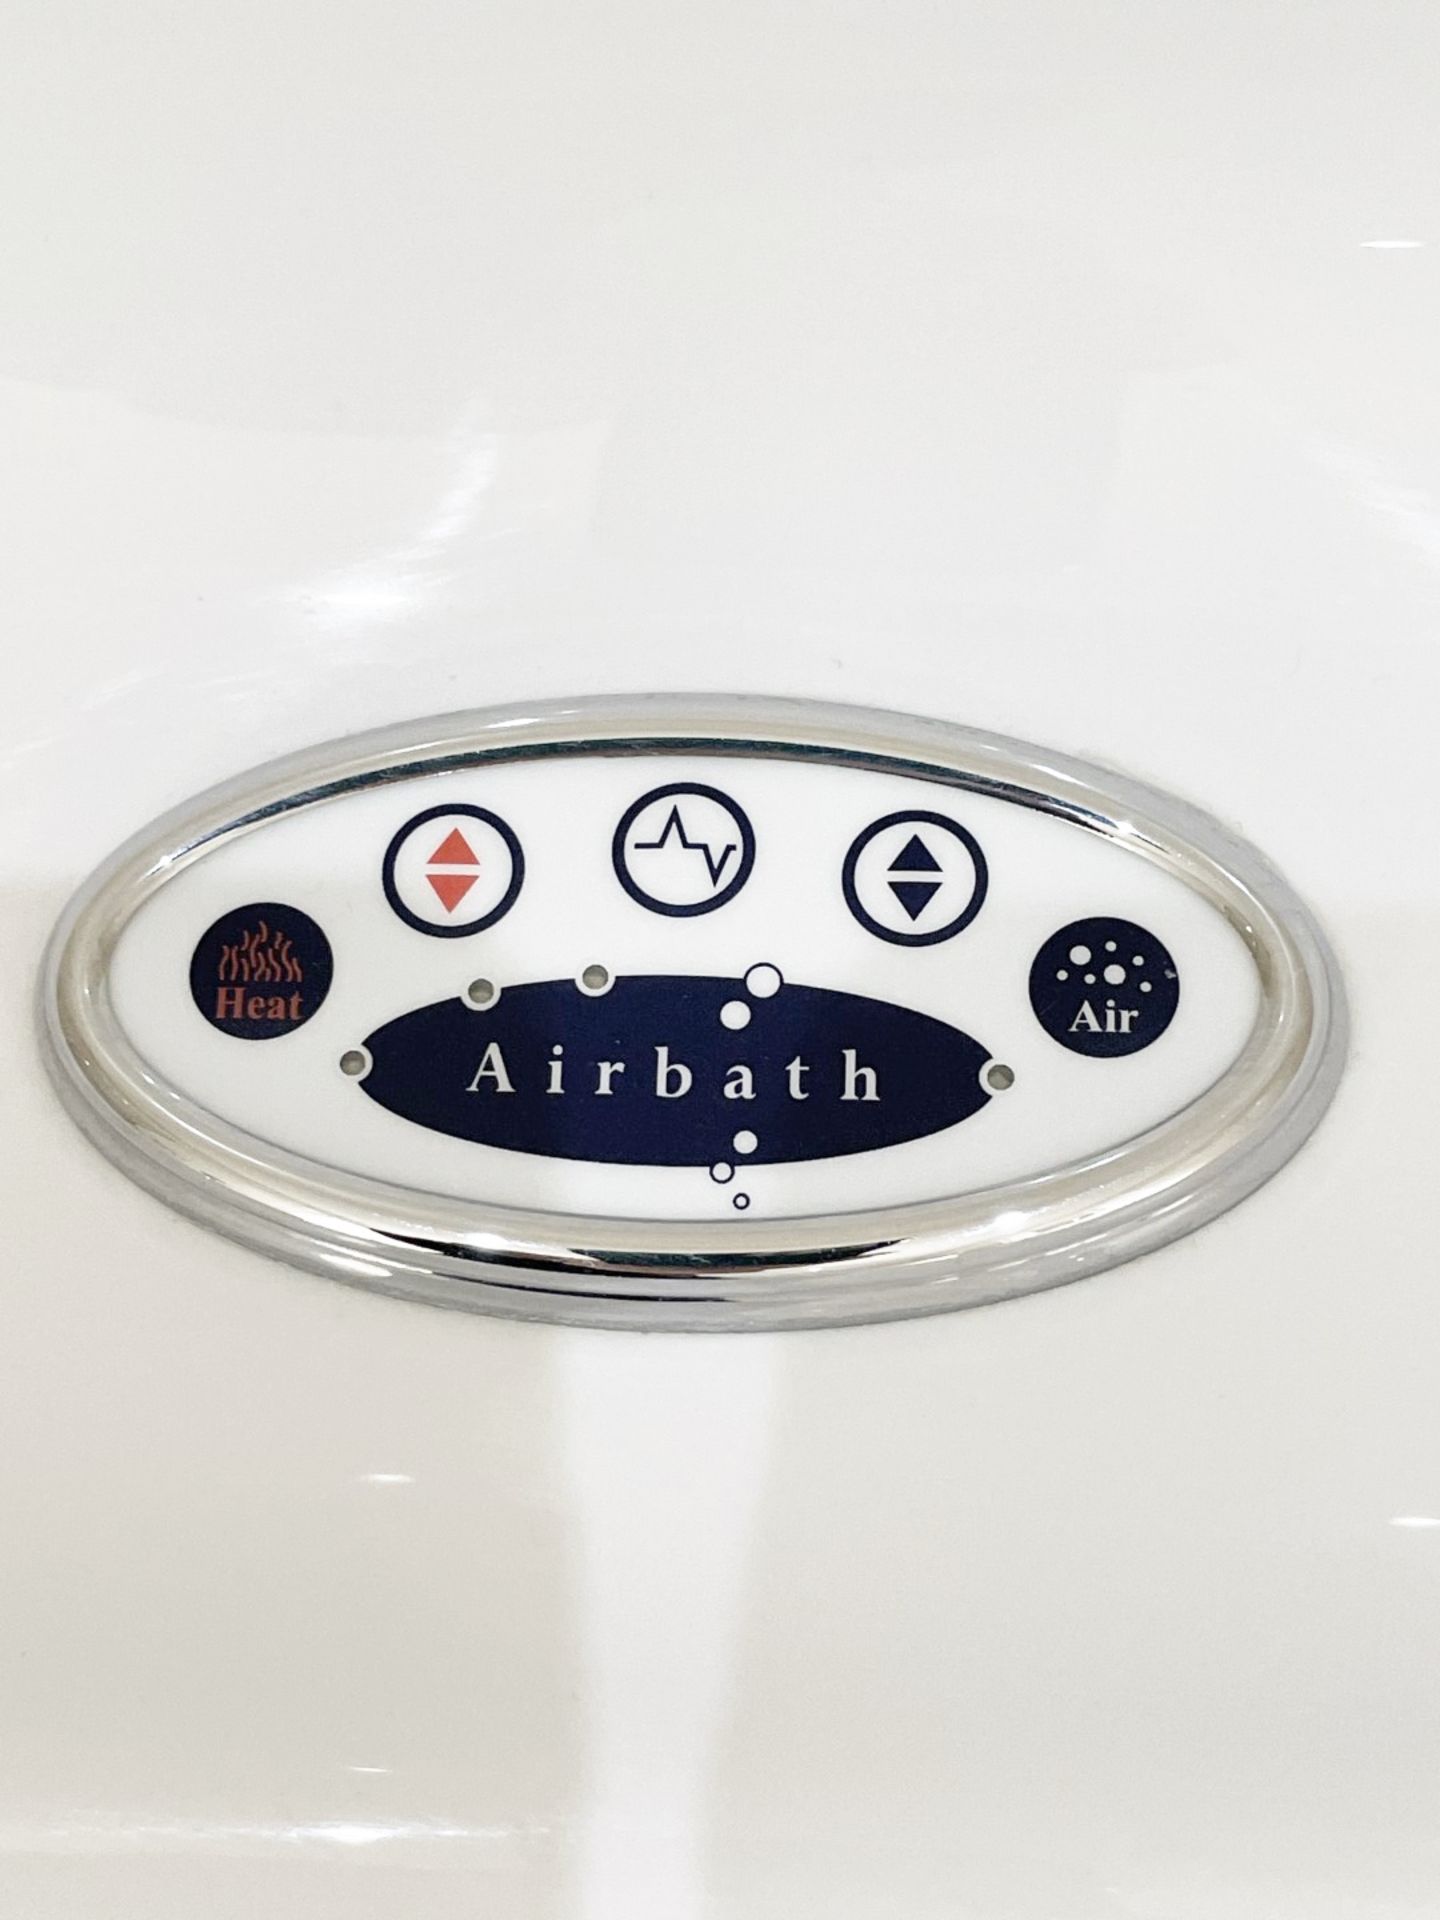 1 x AIRBATH Large Jacuzzi Spa Bath, with Axor Thermostat  - Ref: PAN230 Bed1/bth - CL896 - NO VAT - Image 6 of 20